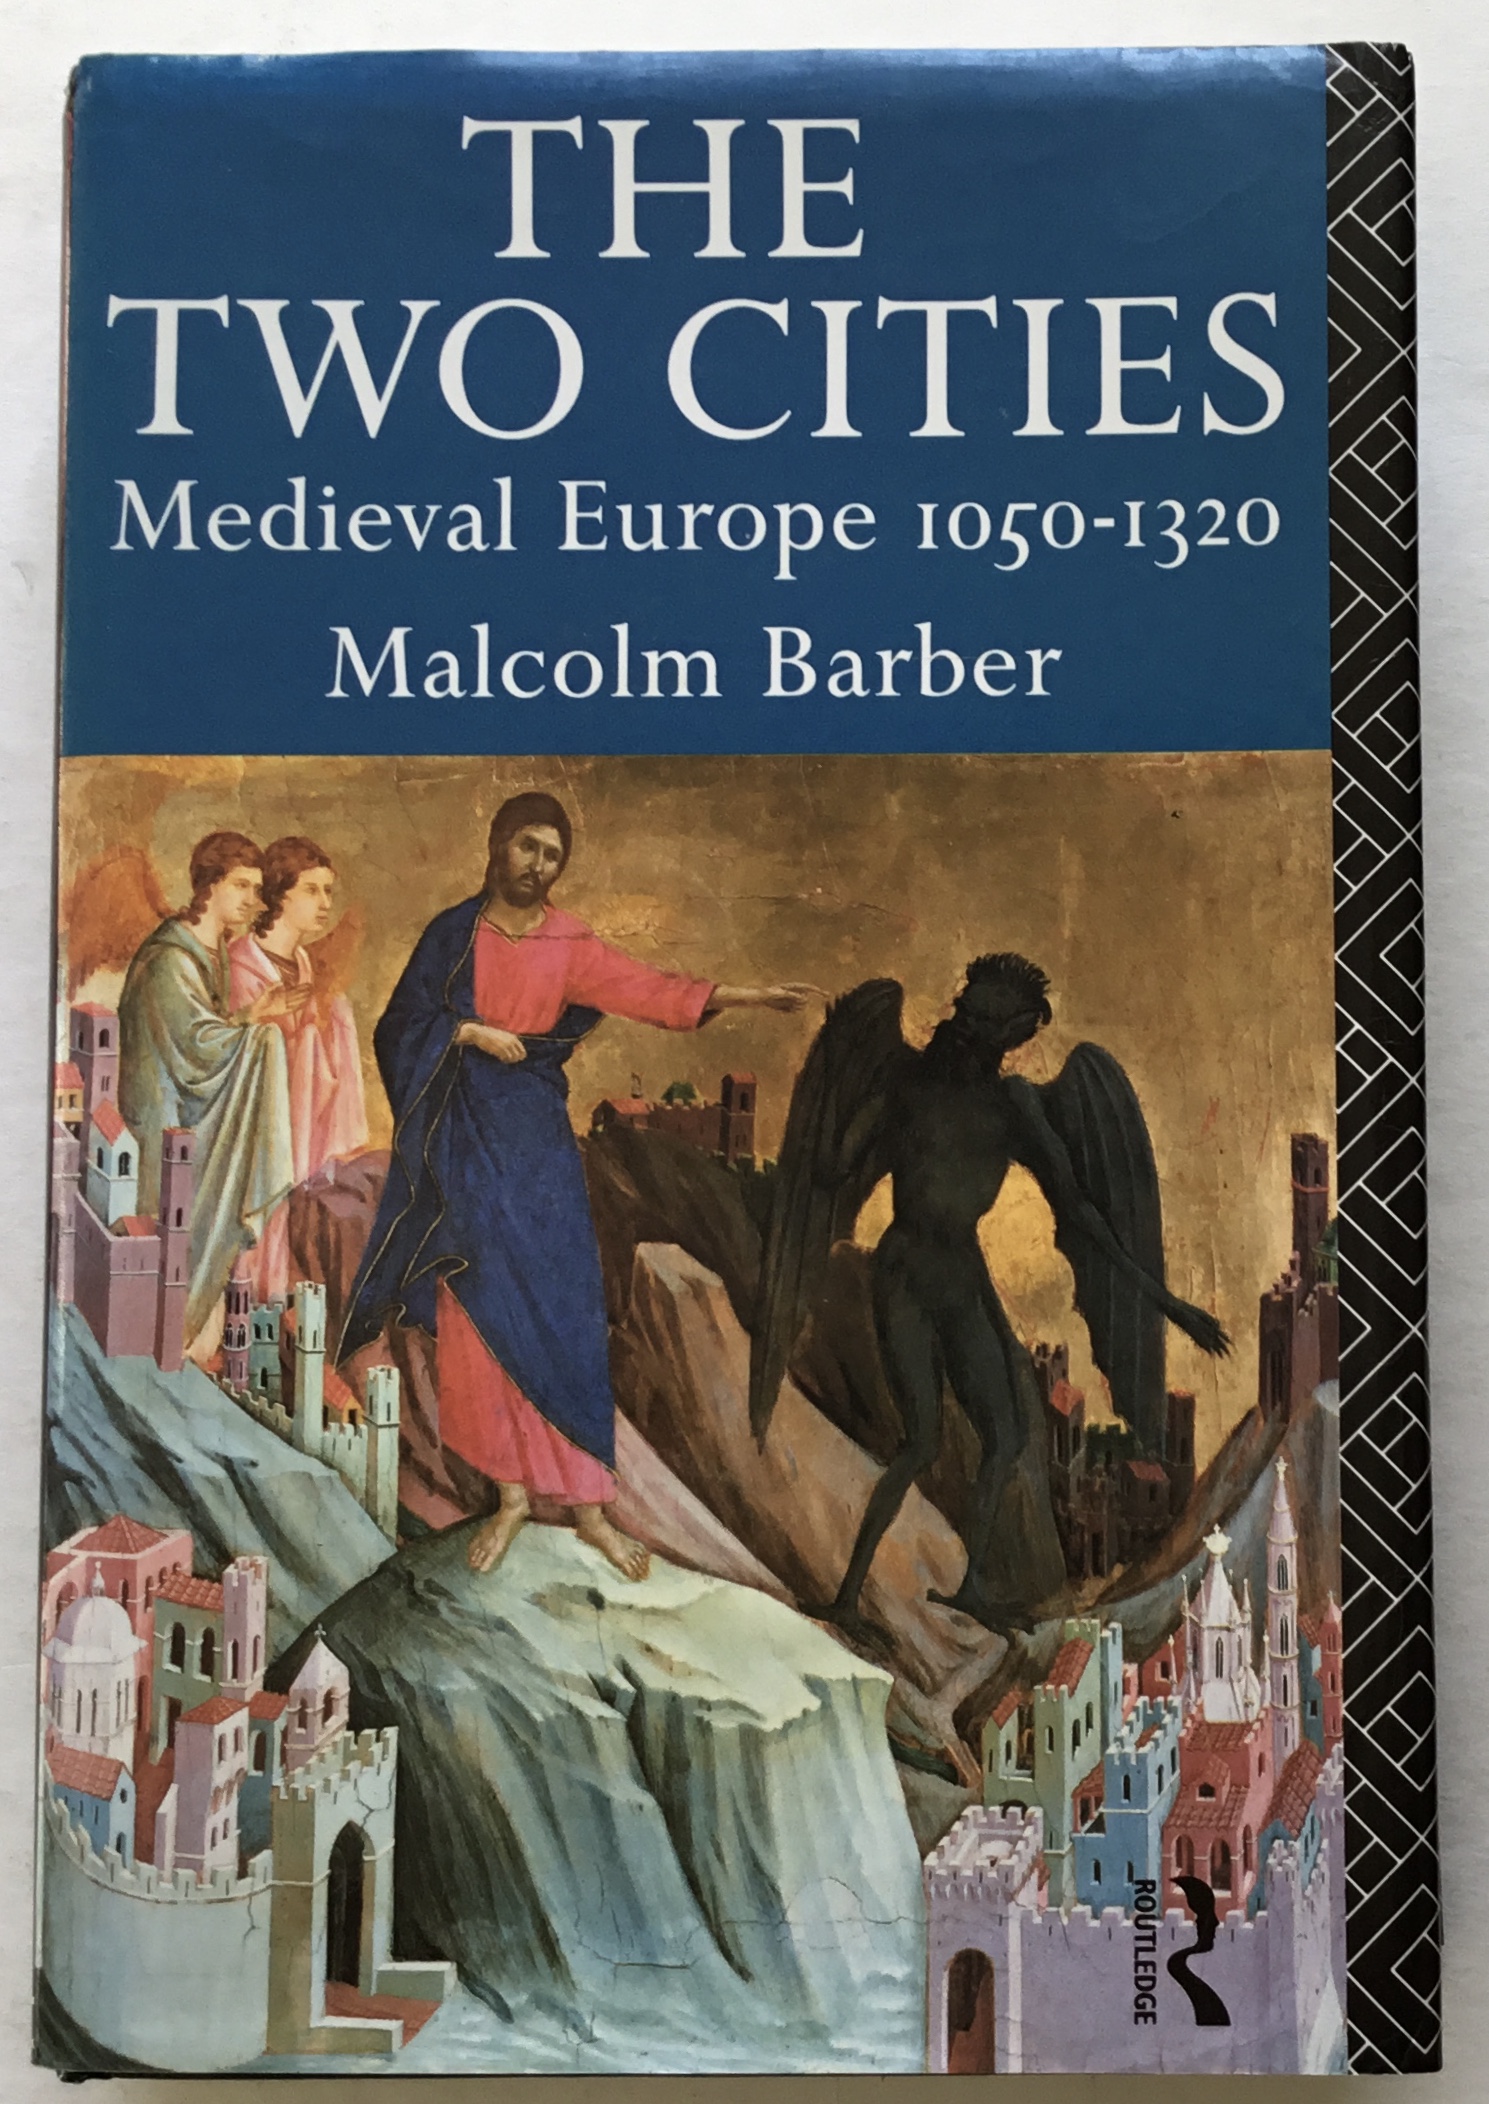 The Two Cities: Medieval Europe 1050-1320. - Malcolm Barber.